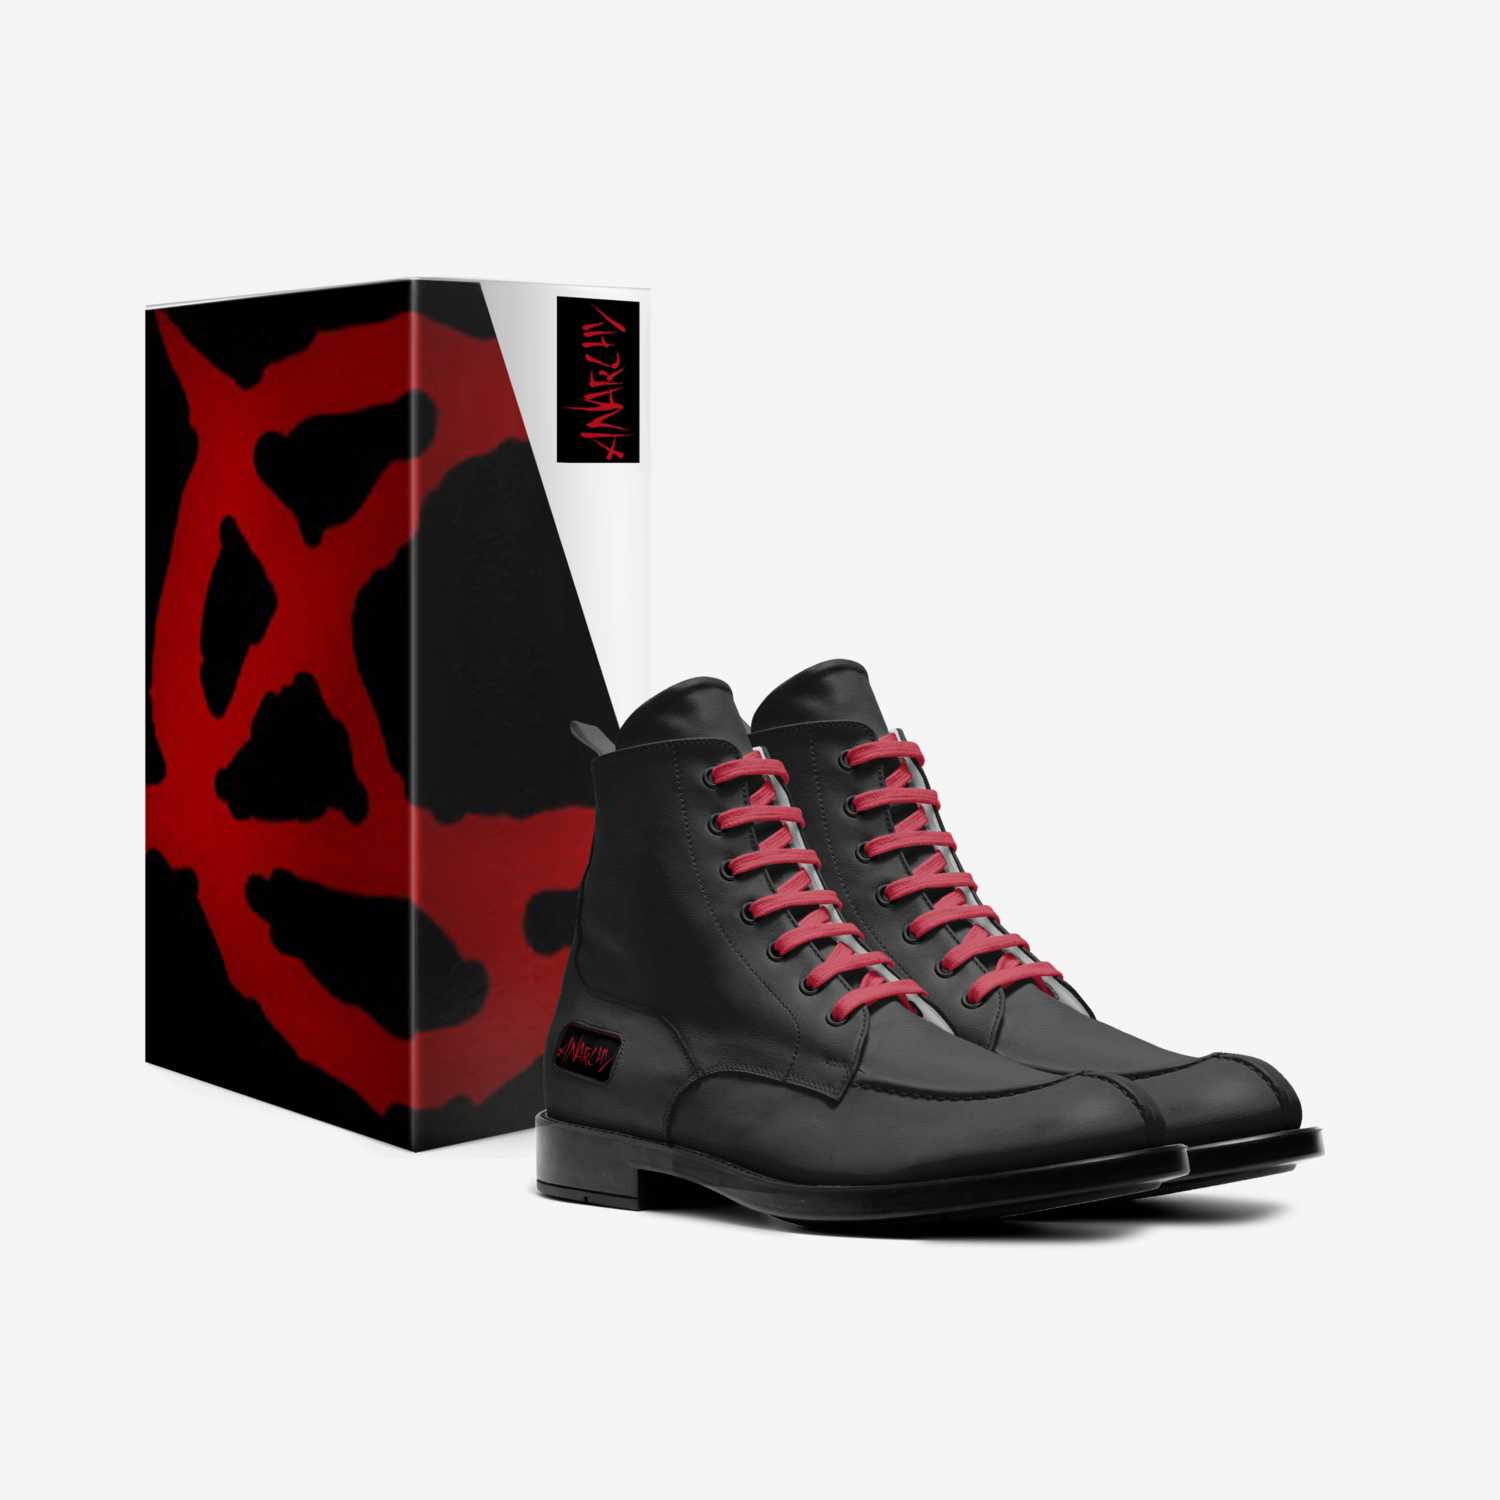 Anarchy custom made in Italy shoes by Aaron Turner | Box view